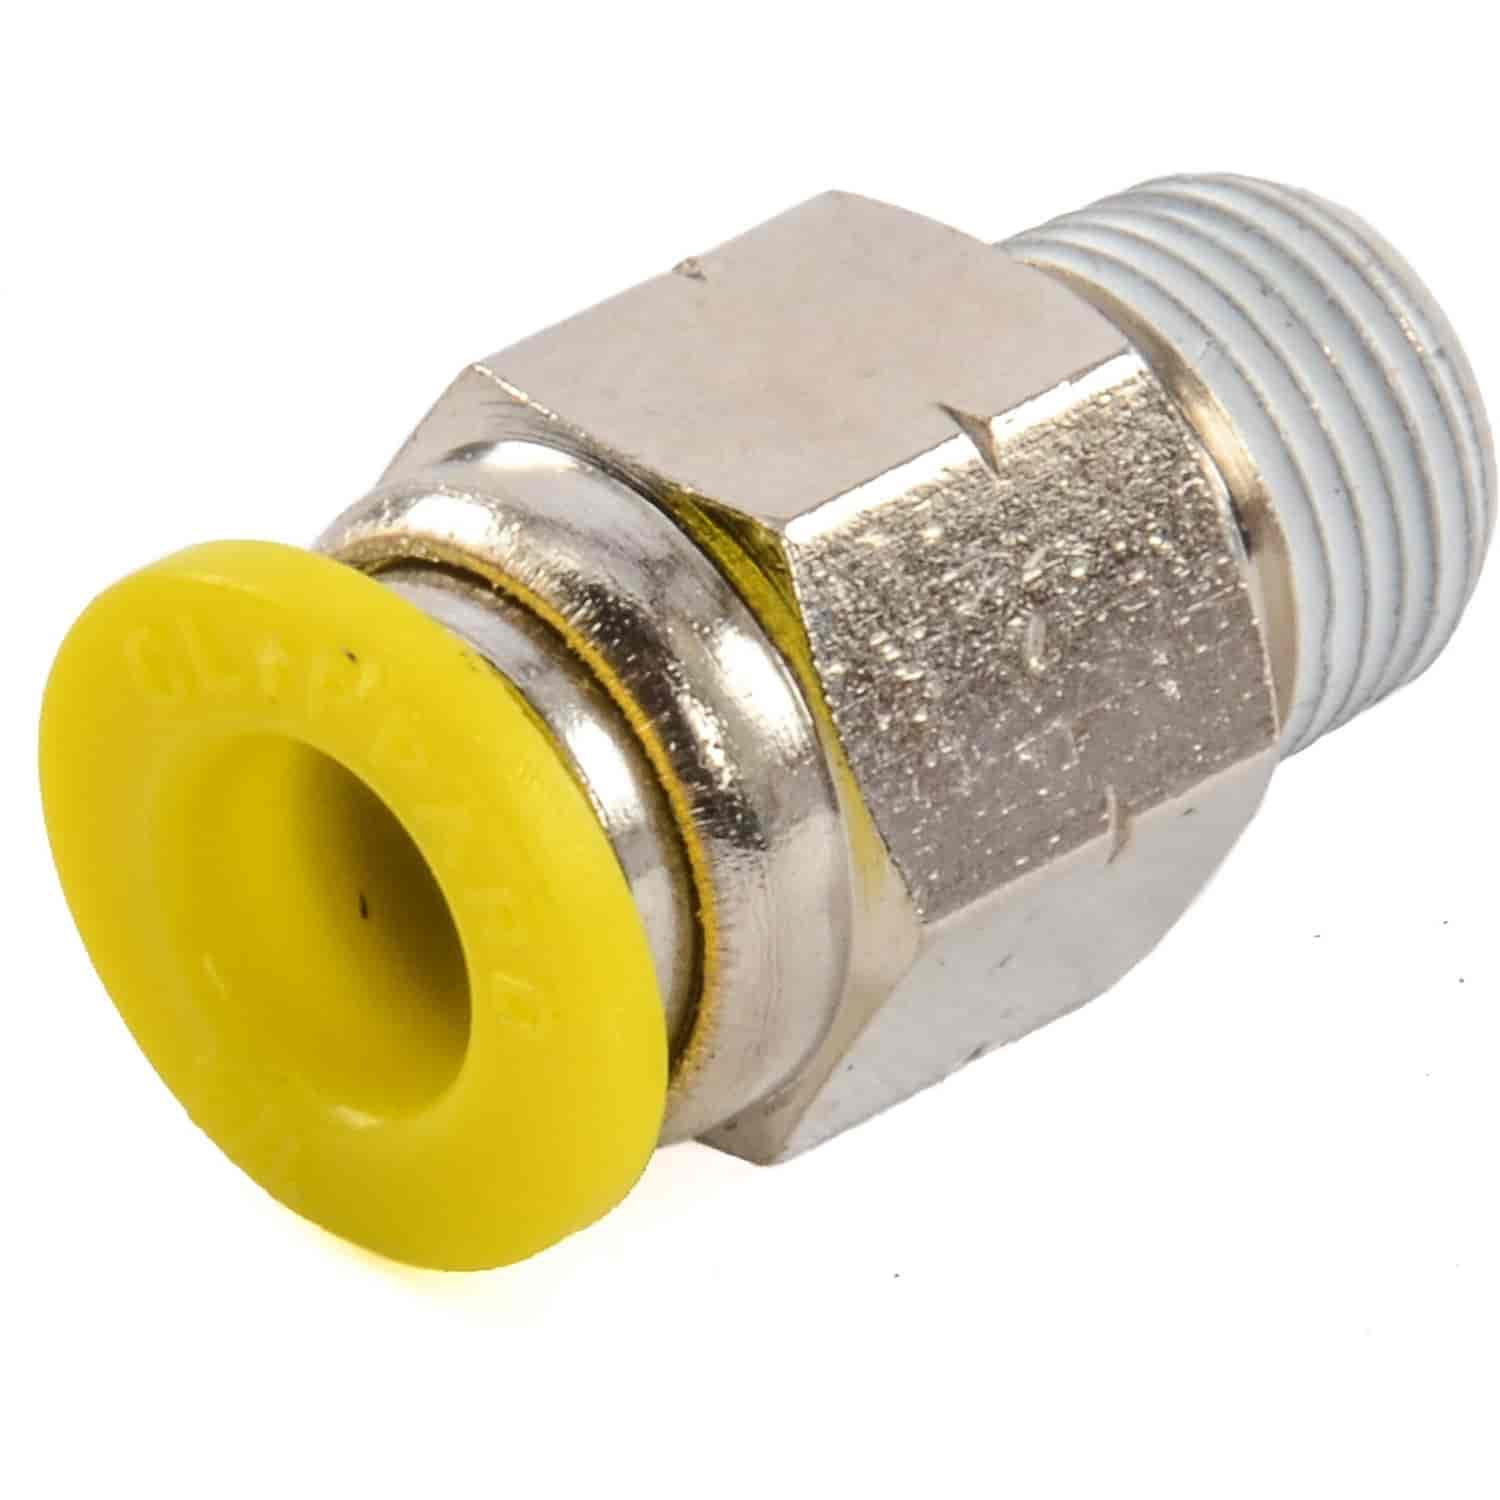 CO2 Quick Push Fitting Straight 1/8" NPT x 1/4" Tube Nickel-Plated Brass Stud